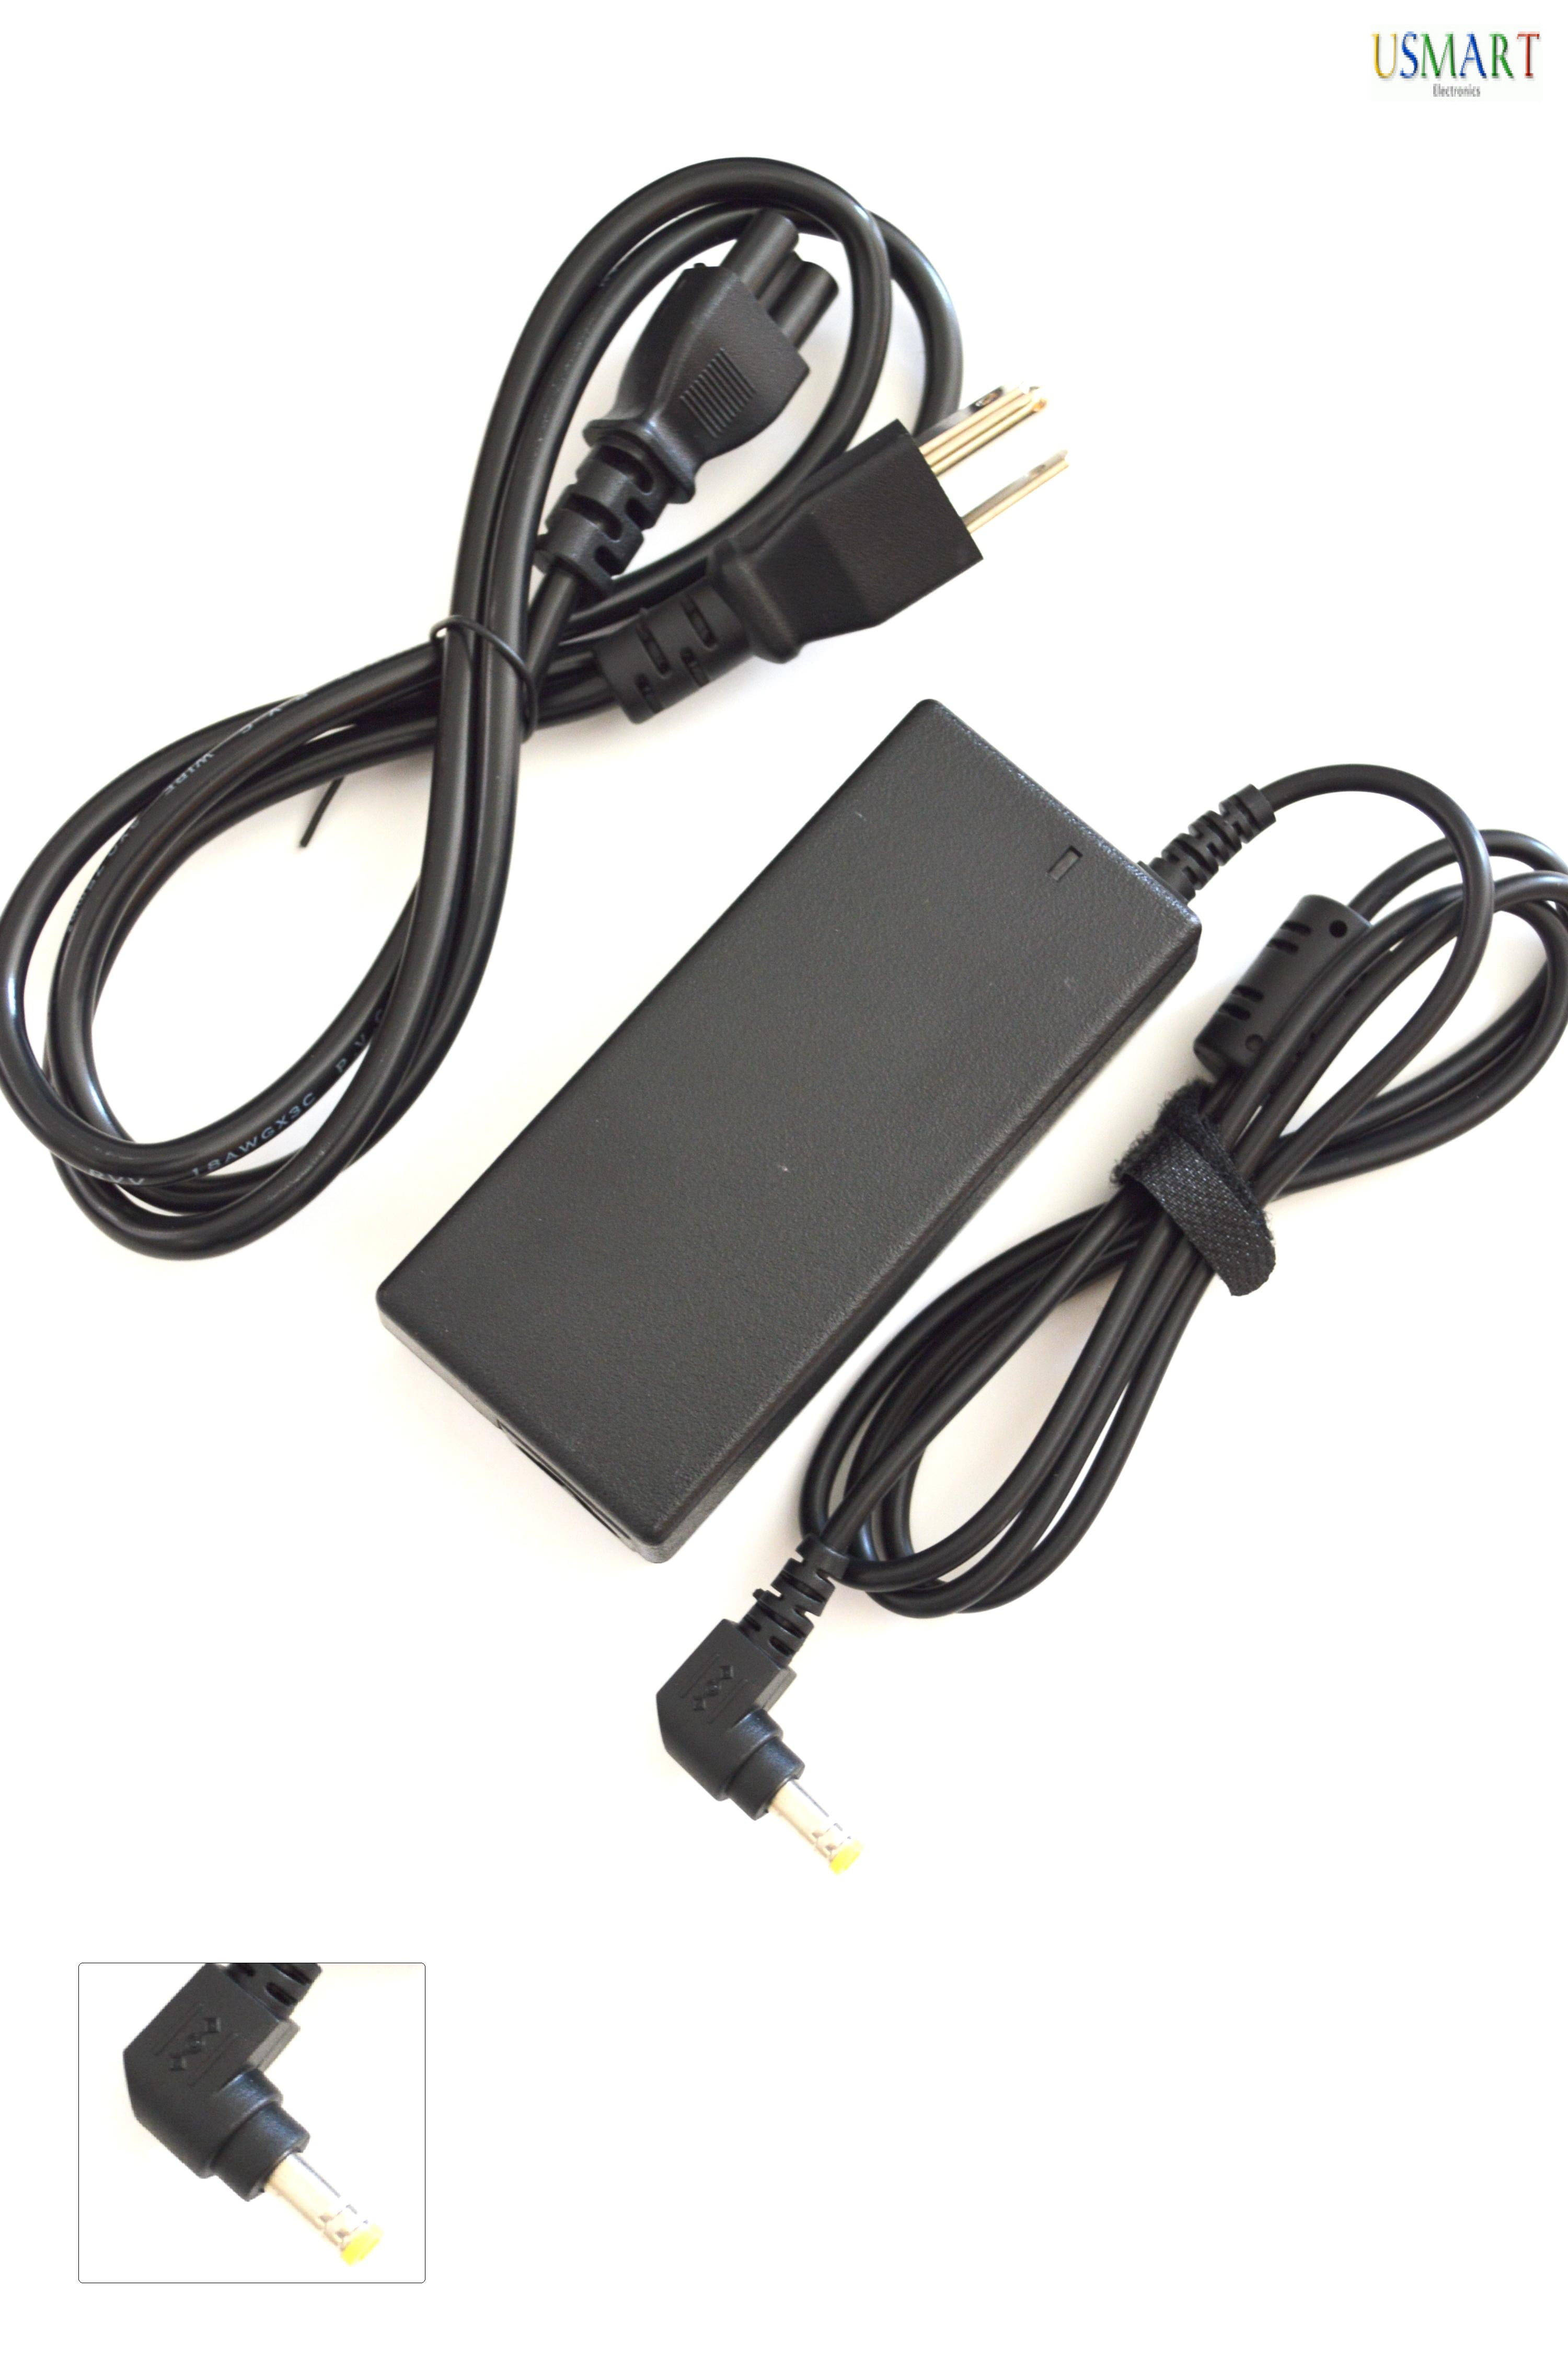 Ac Adapter Charger for Toshiba Satellite S875-S7356 S875-S7370 S875-S7376 S875D S875D-S7239 S875D-S7350  A660 Toshiba PA3917U-1ACA PSAY3U-03X1F PSC0YU PA-1750-29 Laptop Power Supply